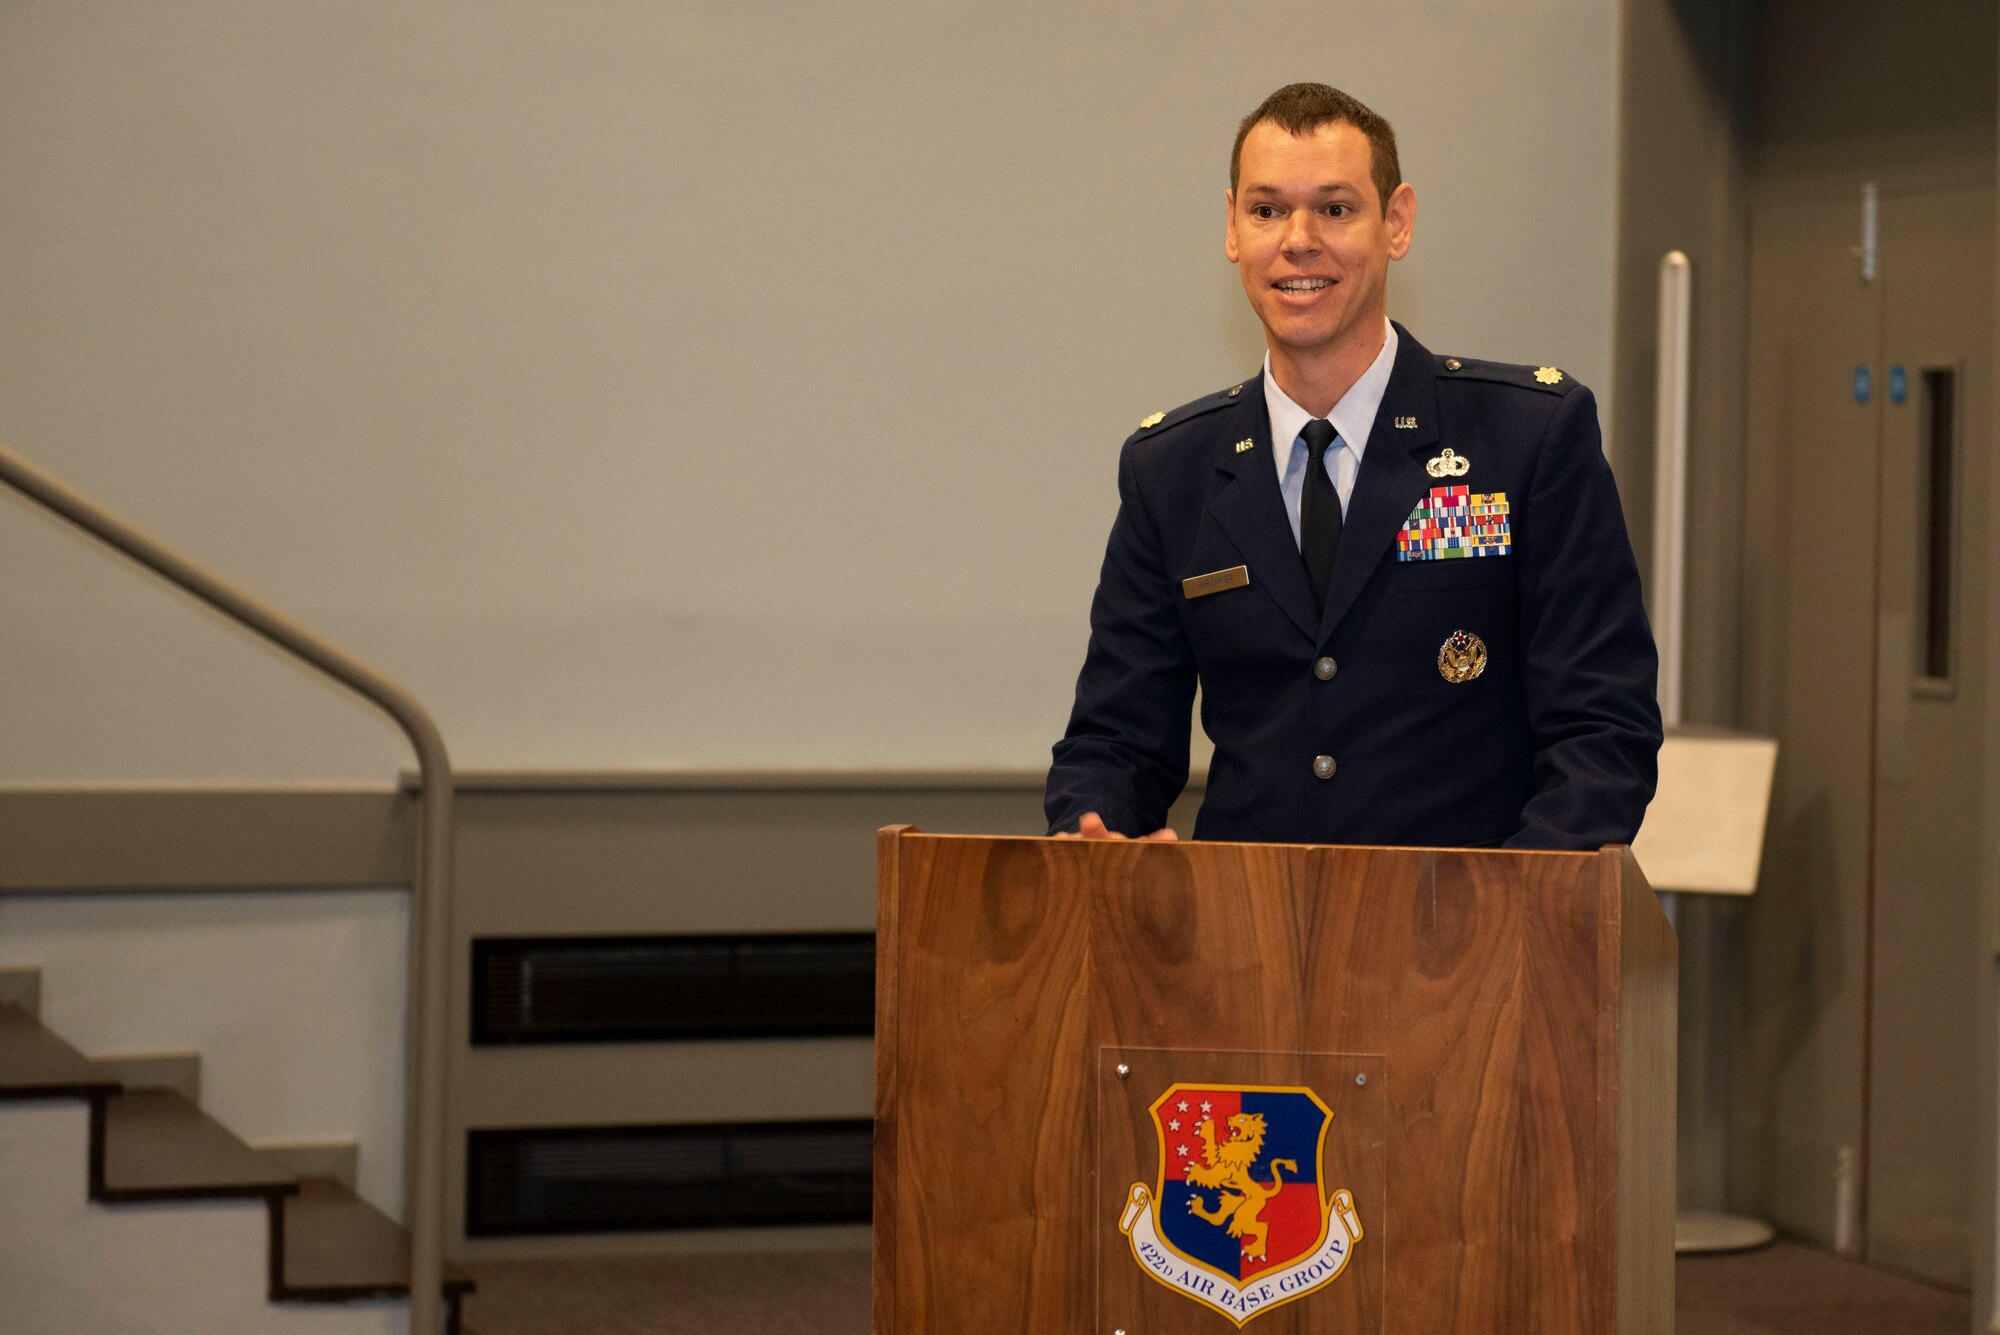 U.S. Air Force Maj. Timothy Kirchner, 422nd Air Base Squadron commander, speaks during a change of command ceremony at RAF Croughton, England, July 9, 2020. The change of command ceremony is rooted in military history dating back to the 18th century representing the relinquishing of power from one officer to another. (U.S. Air Force photo by Airman 1st Class Jennifer Zima)